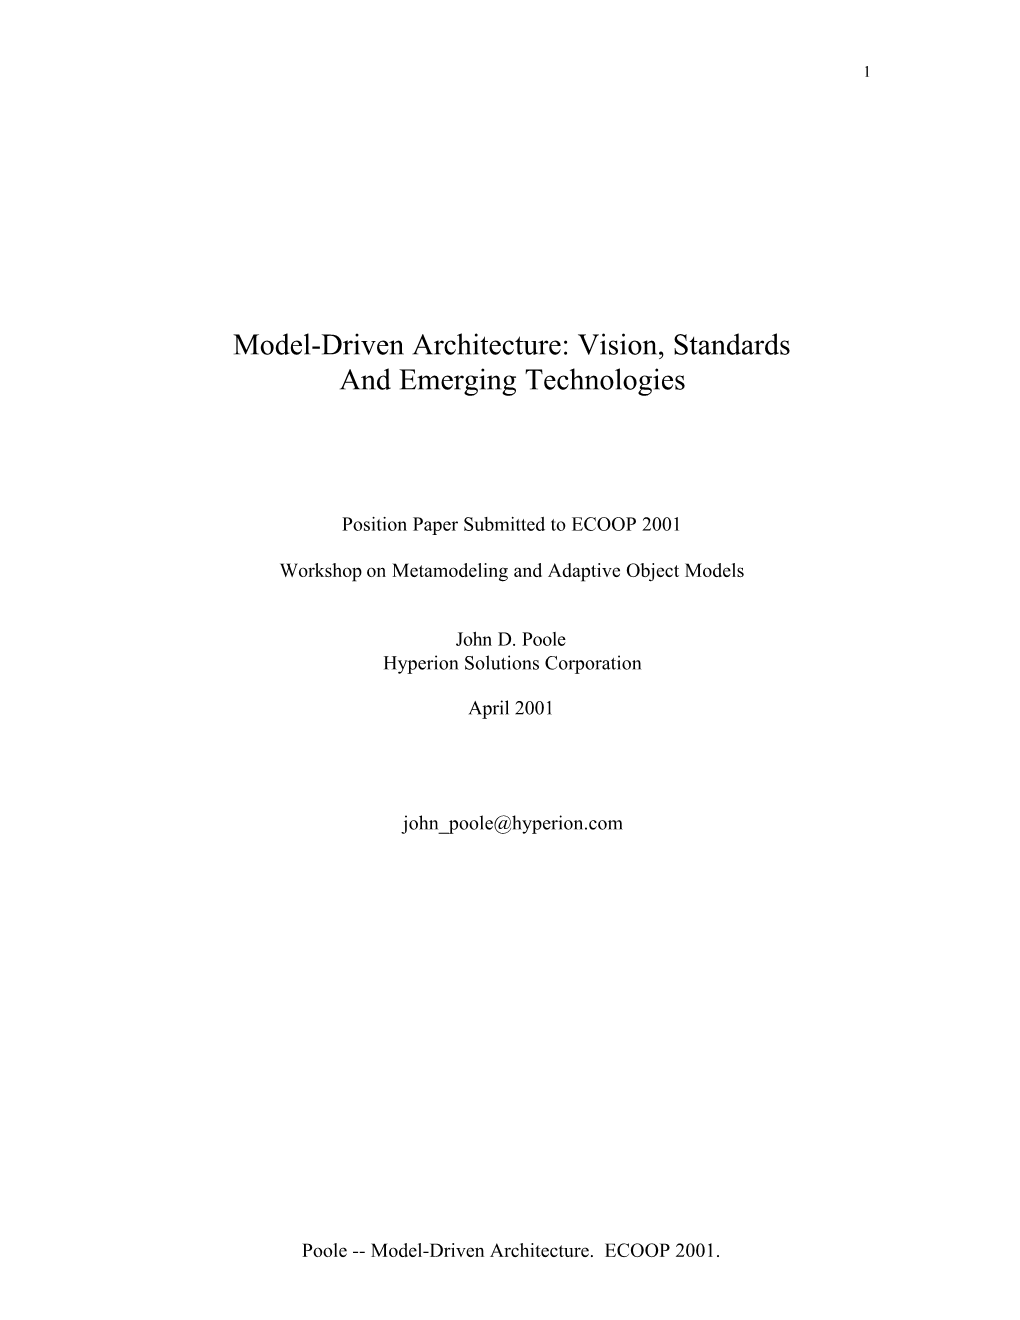 Model-Driven Architecture: Vision, Standards and Emerging Technologies